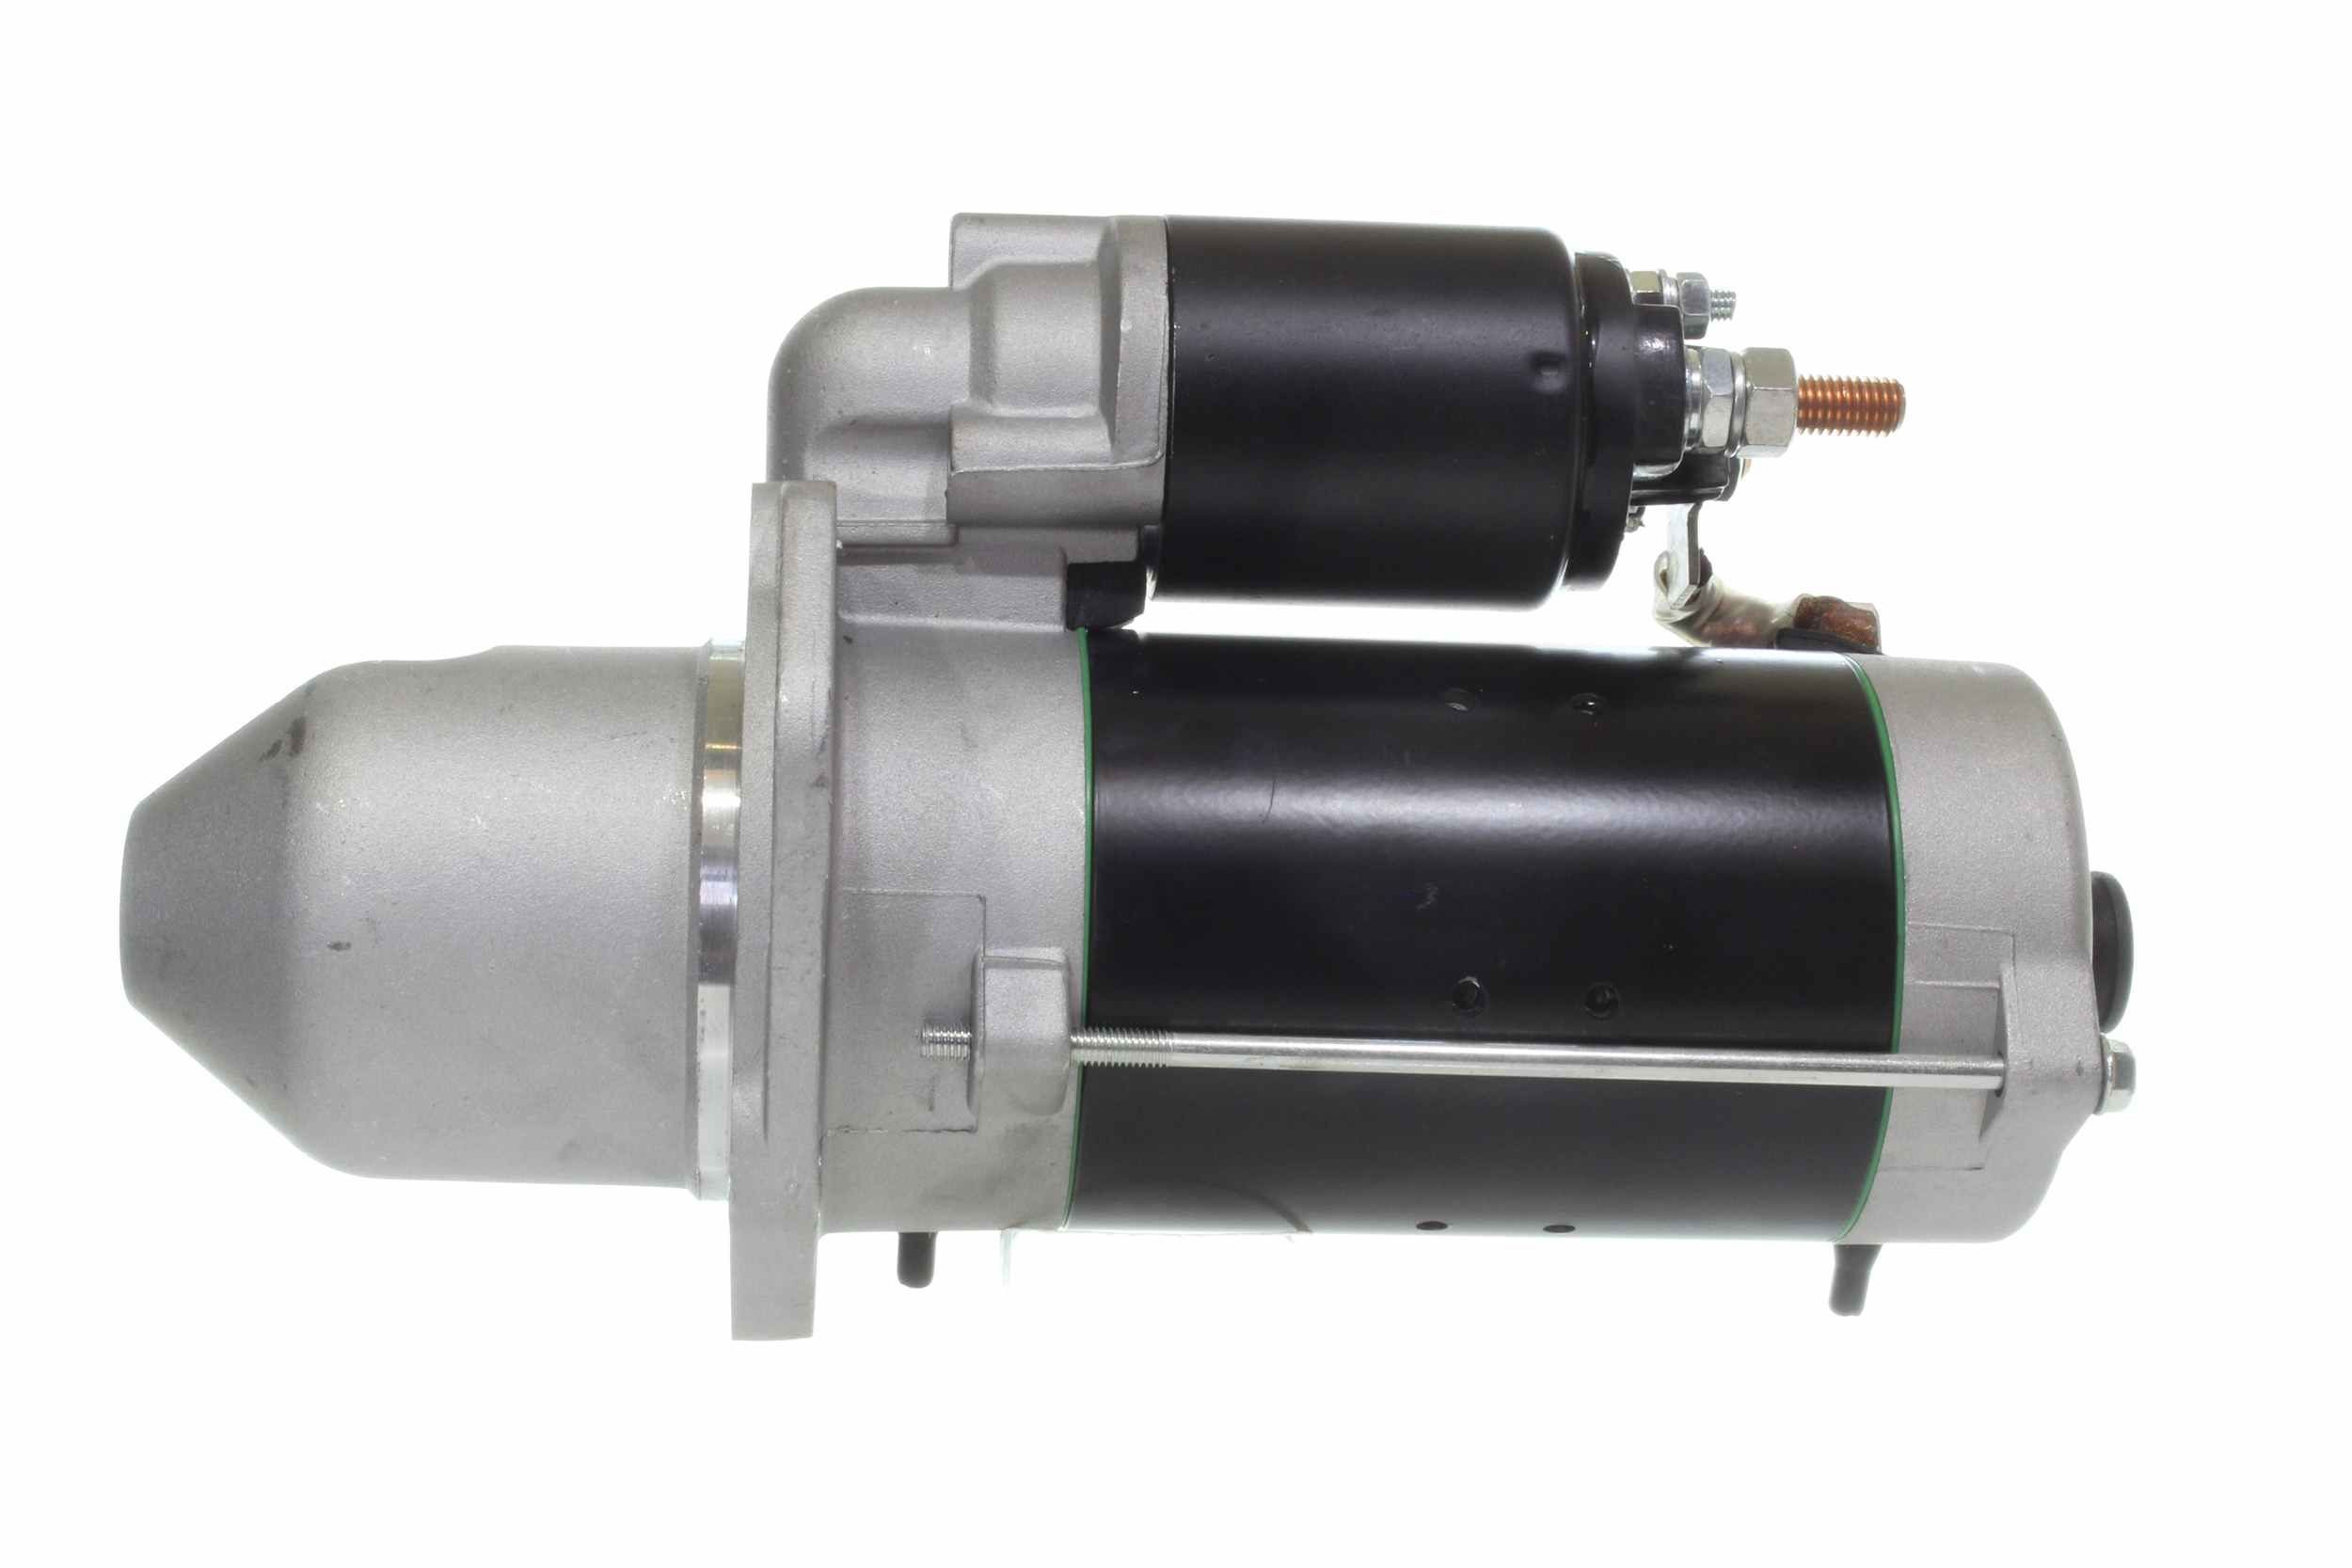 10439427 Engine starter motor ALANKO 30172 review and test